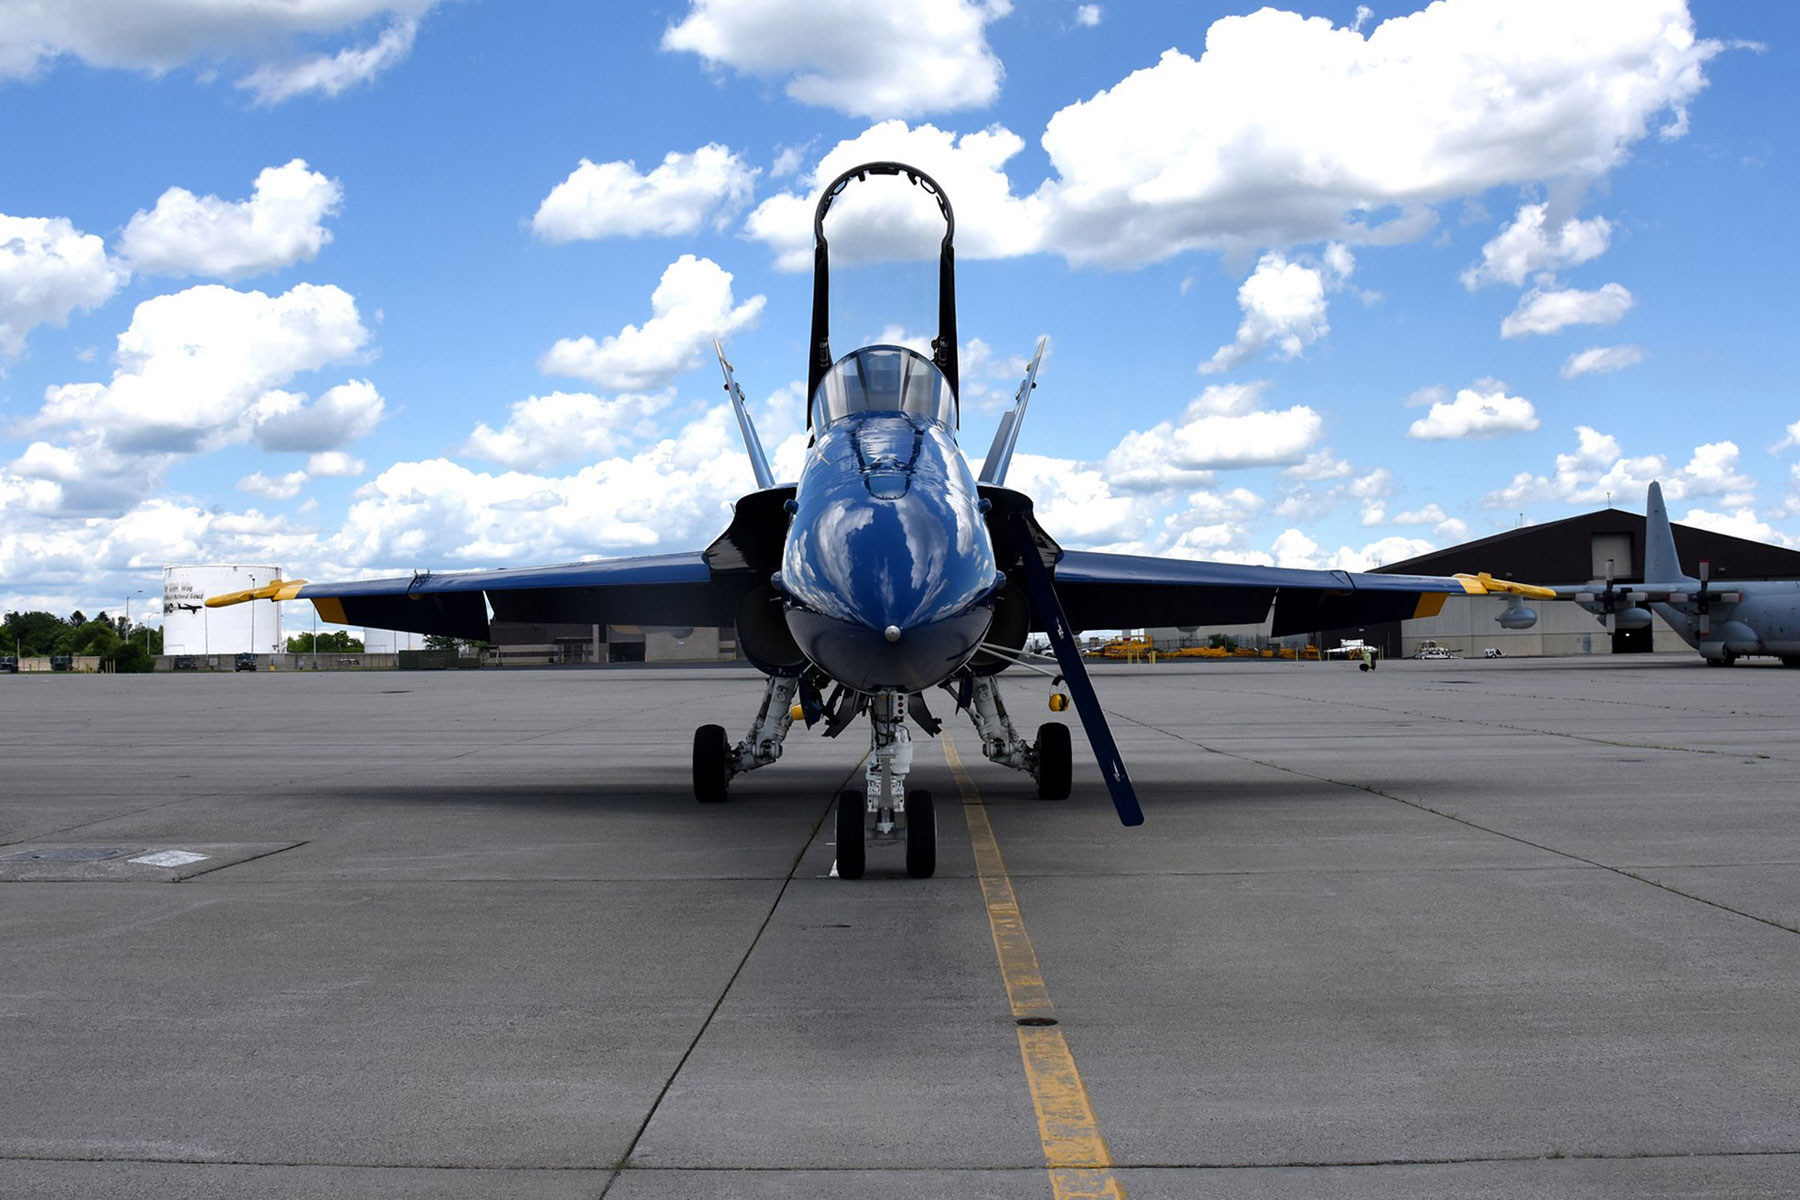 Blue Angels Make Powerful Impression at New York Air Show | Military.com